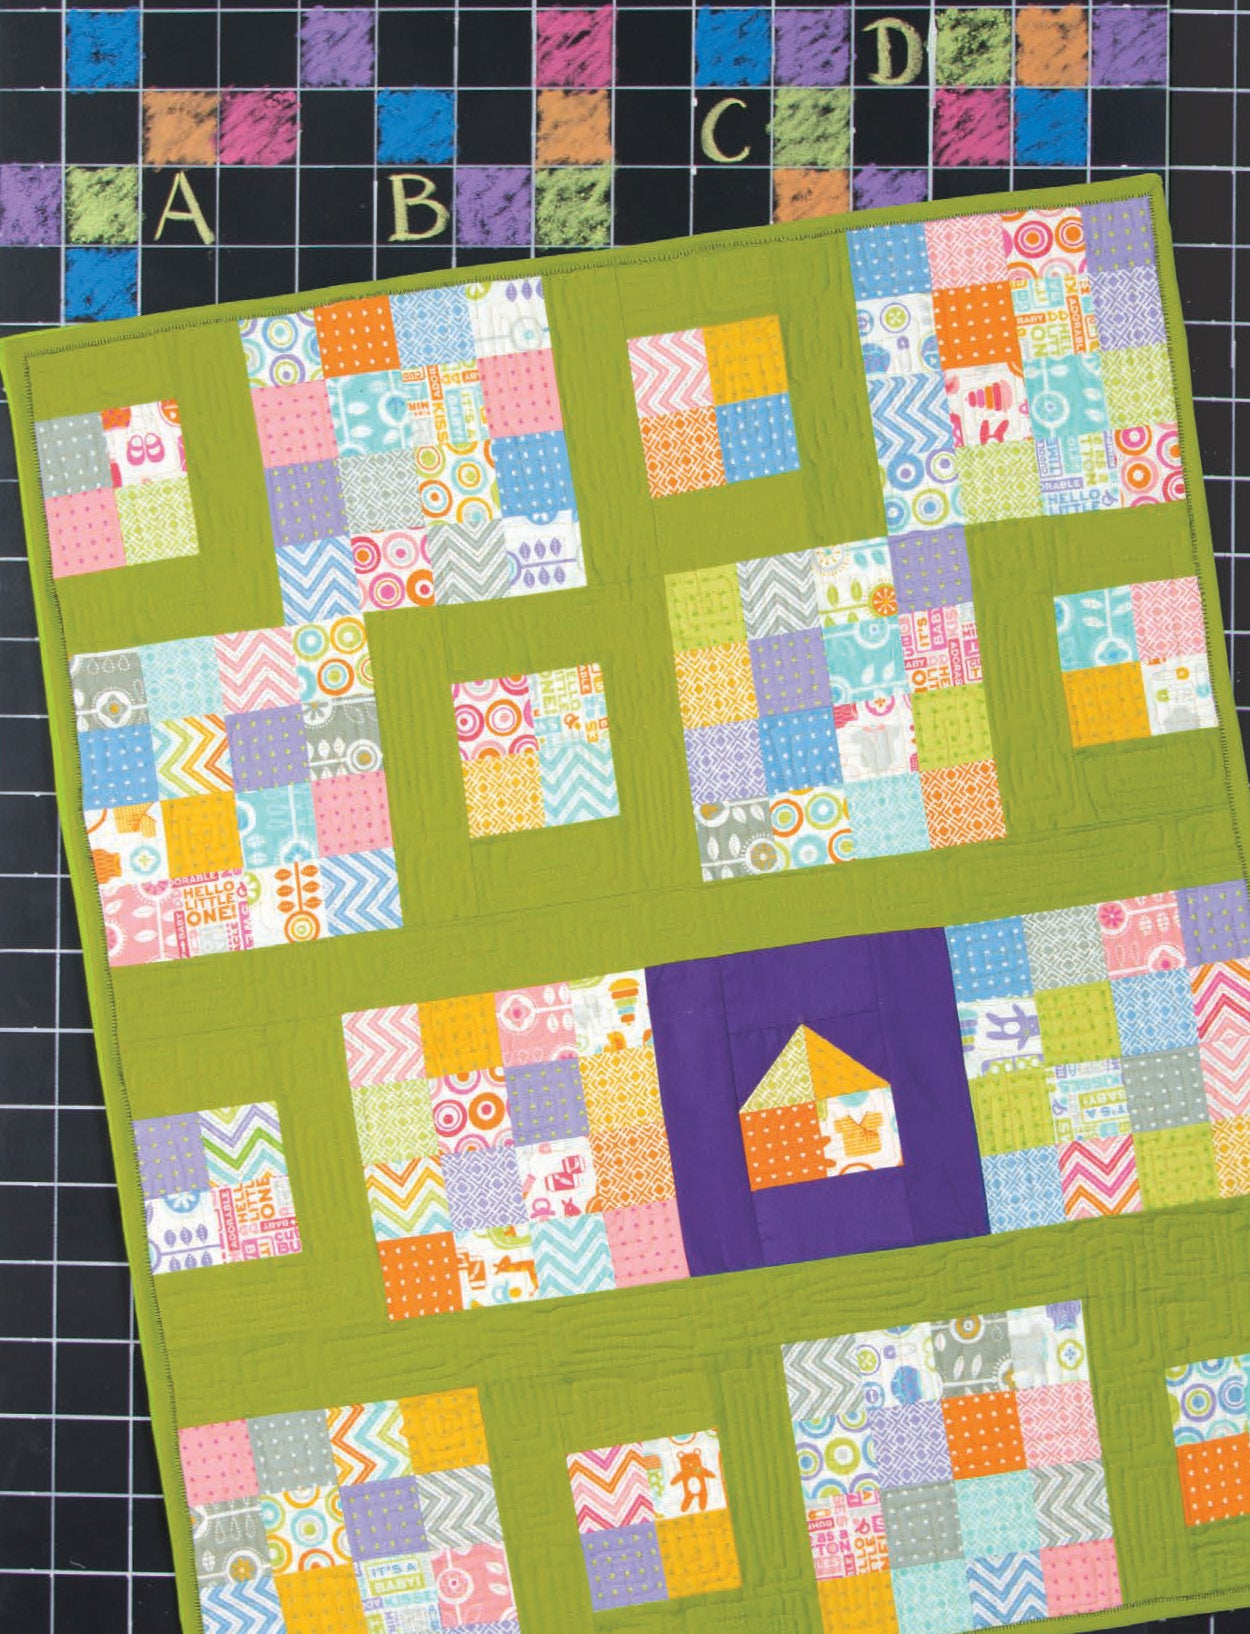 Easy-Cut Baby Quilts